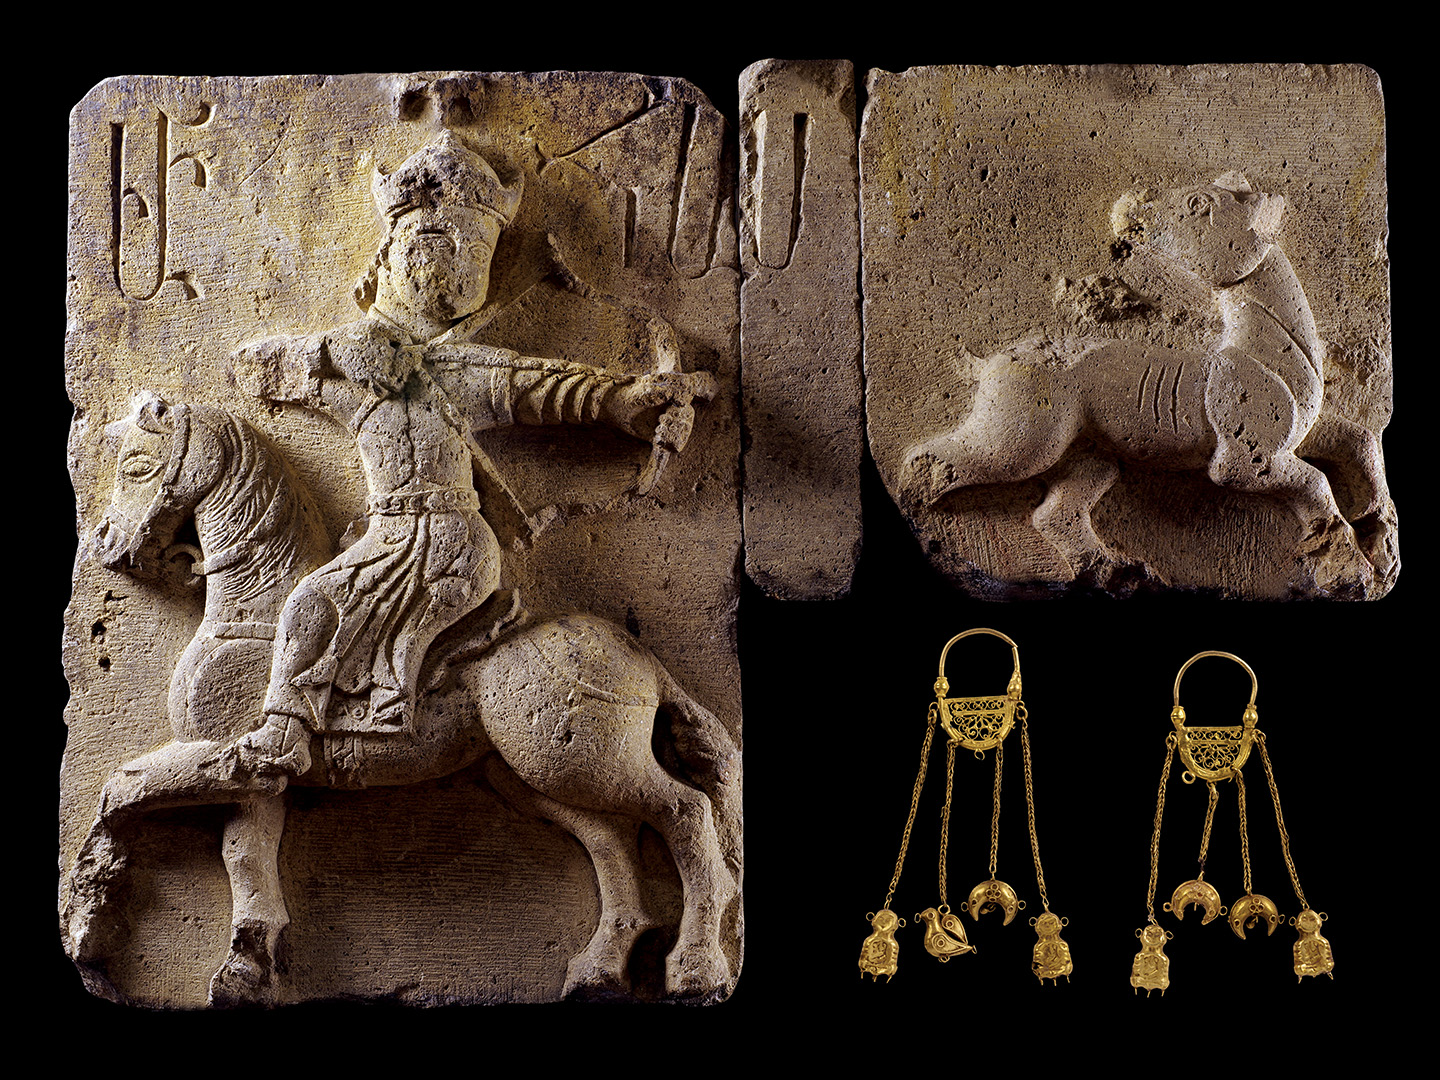 A sample of Armenian relief sculptures, textiles, manuscripts and jewelry that will be displayed at the Metropolitan Museum of Art’s Armenia! exhibit.